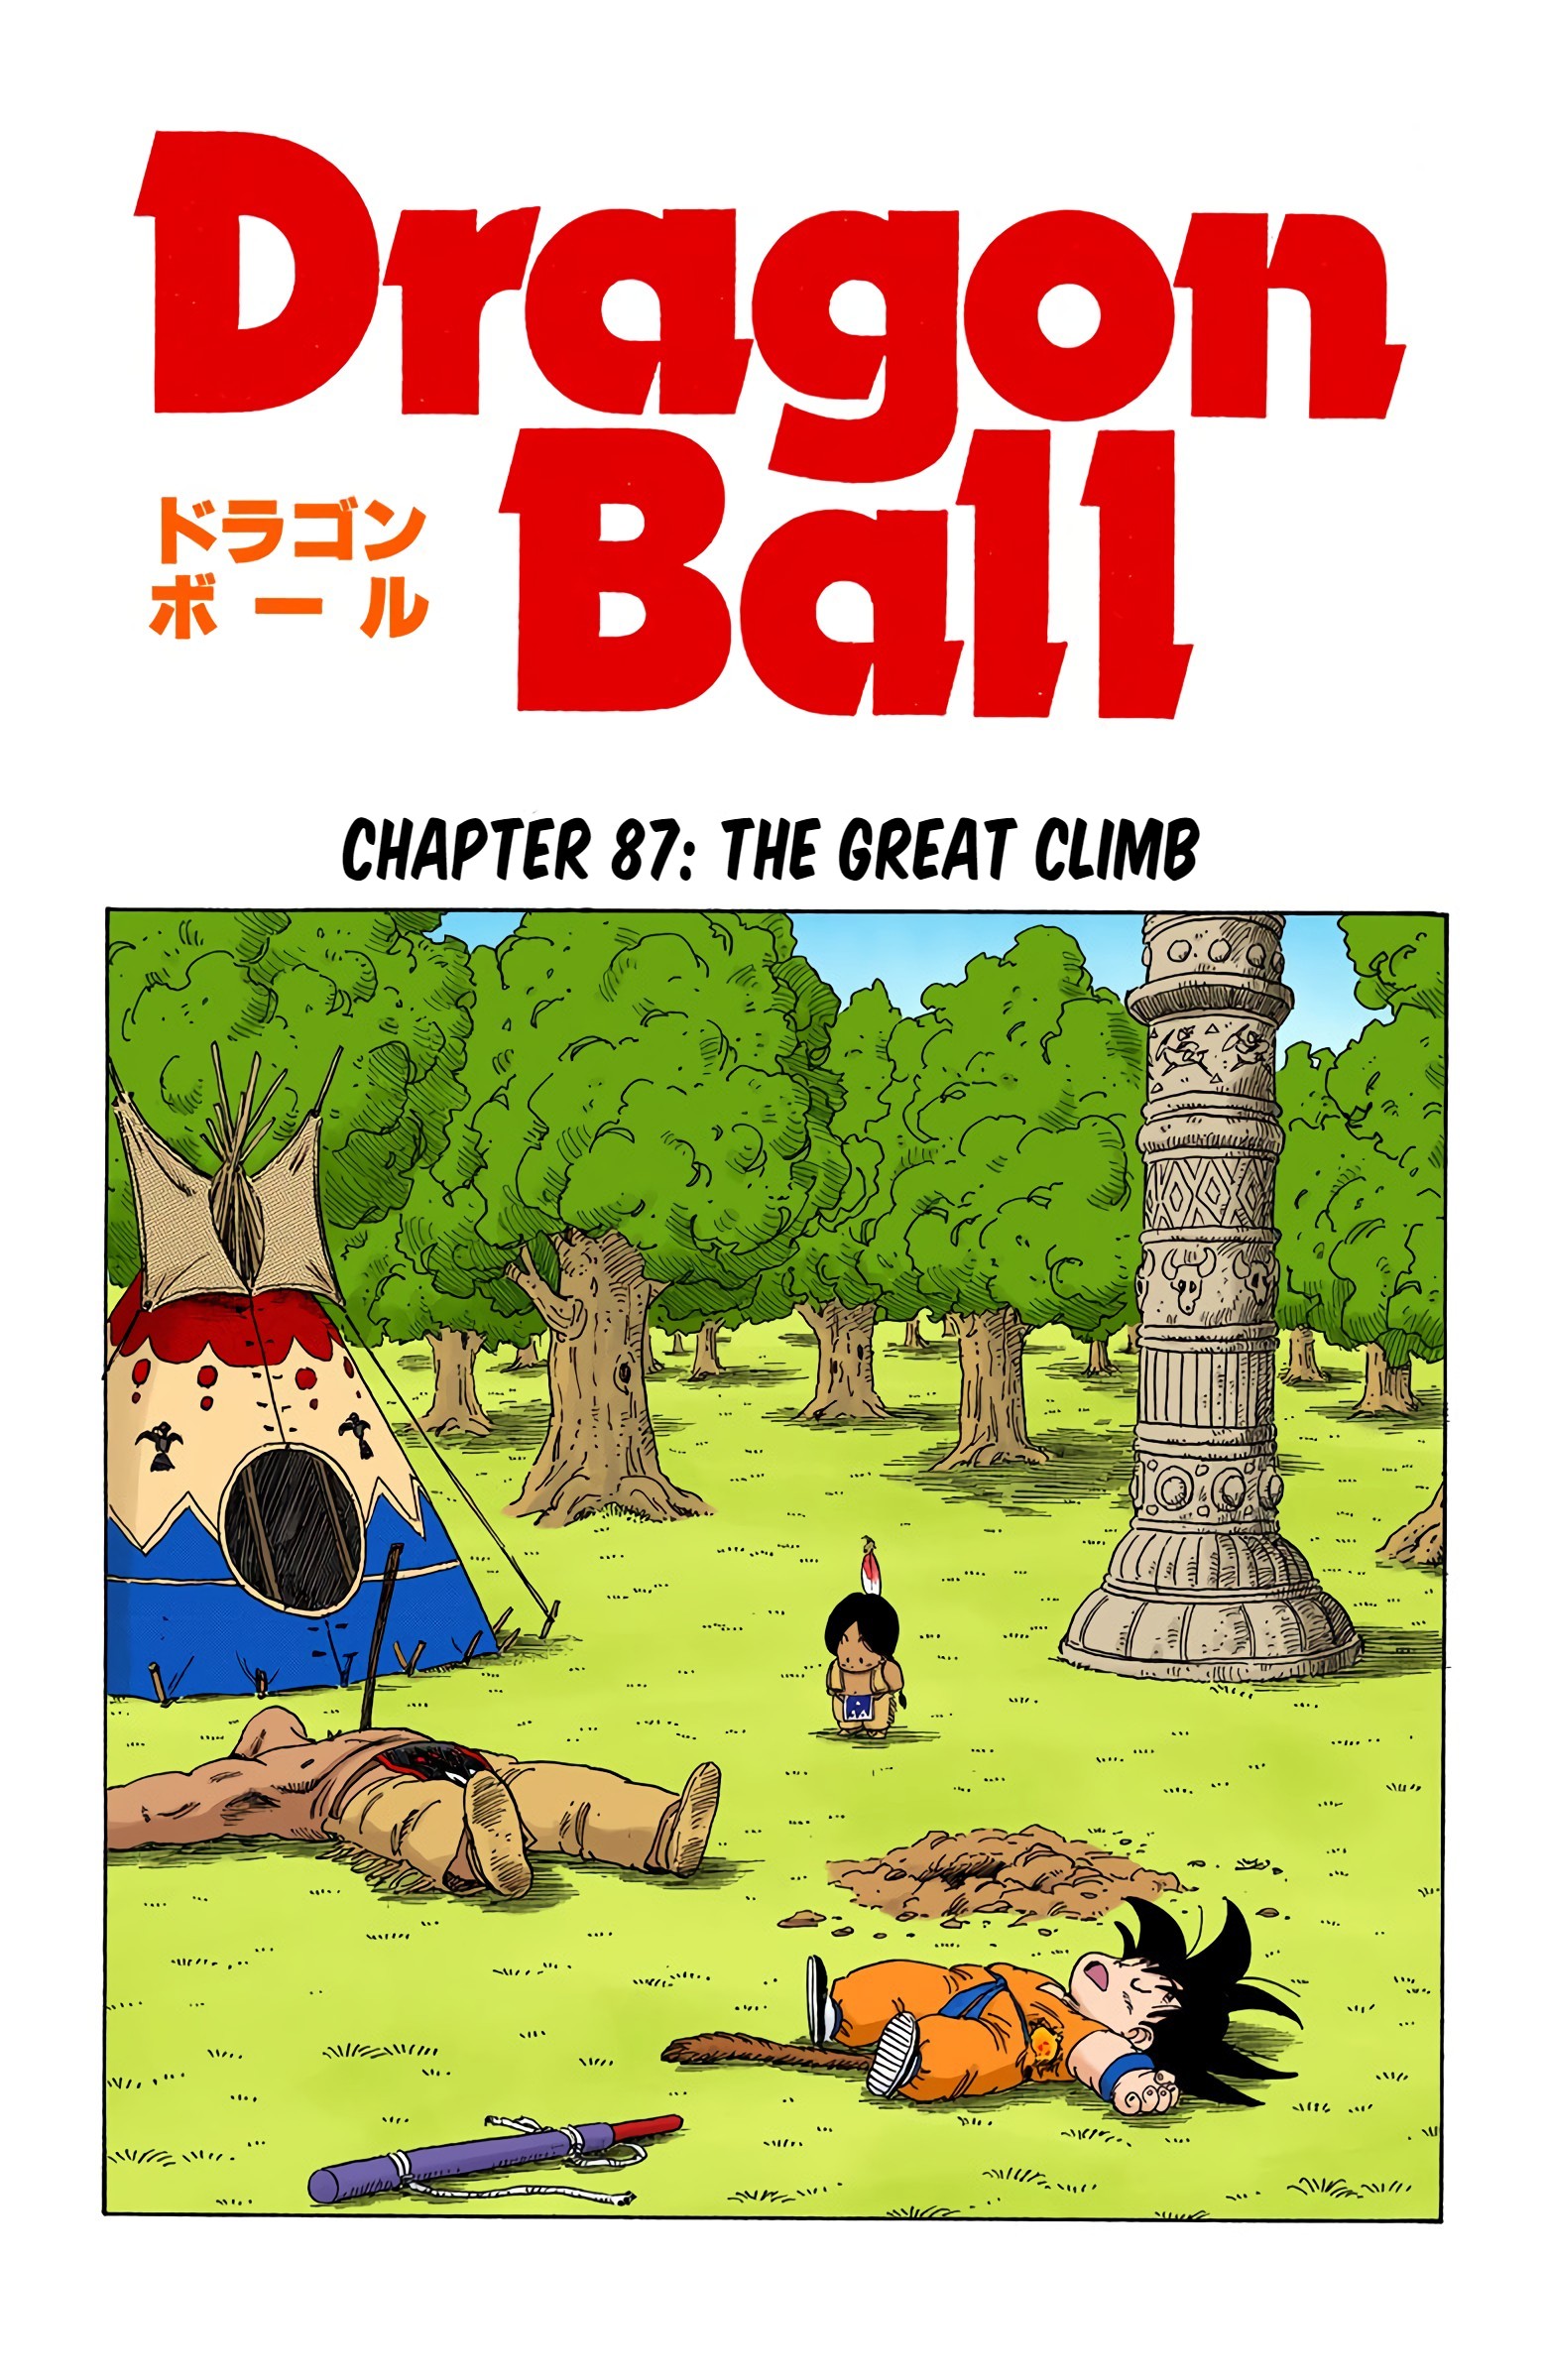 Dragon Ball - Full Color Edition Vol.7 Chapter 87